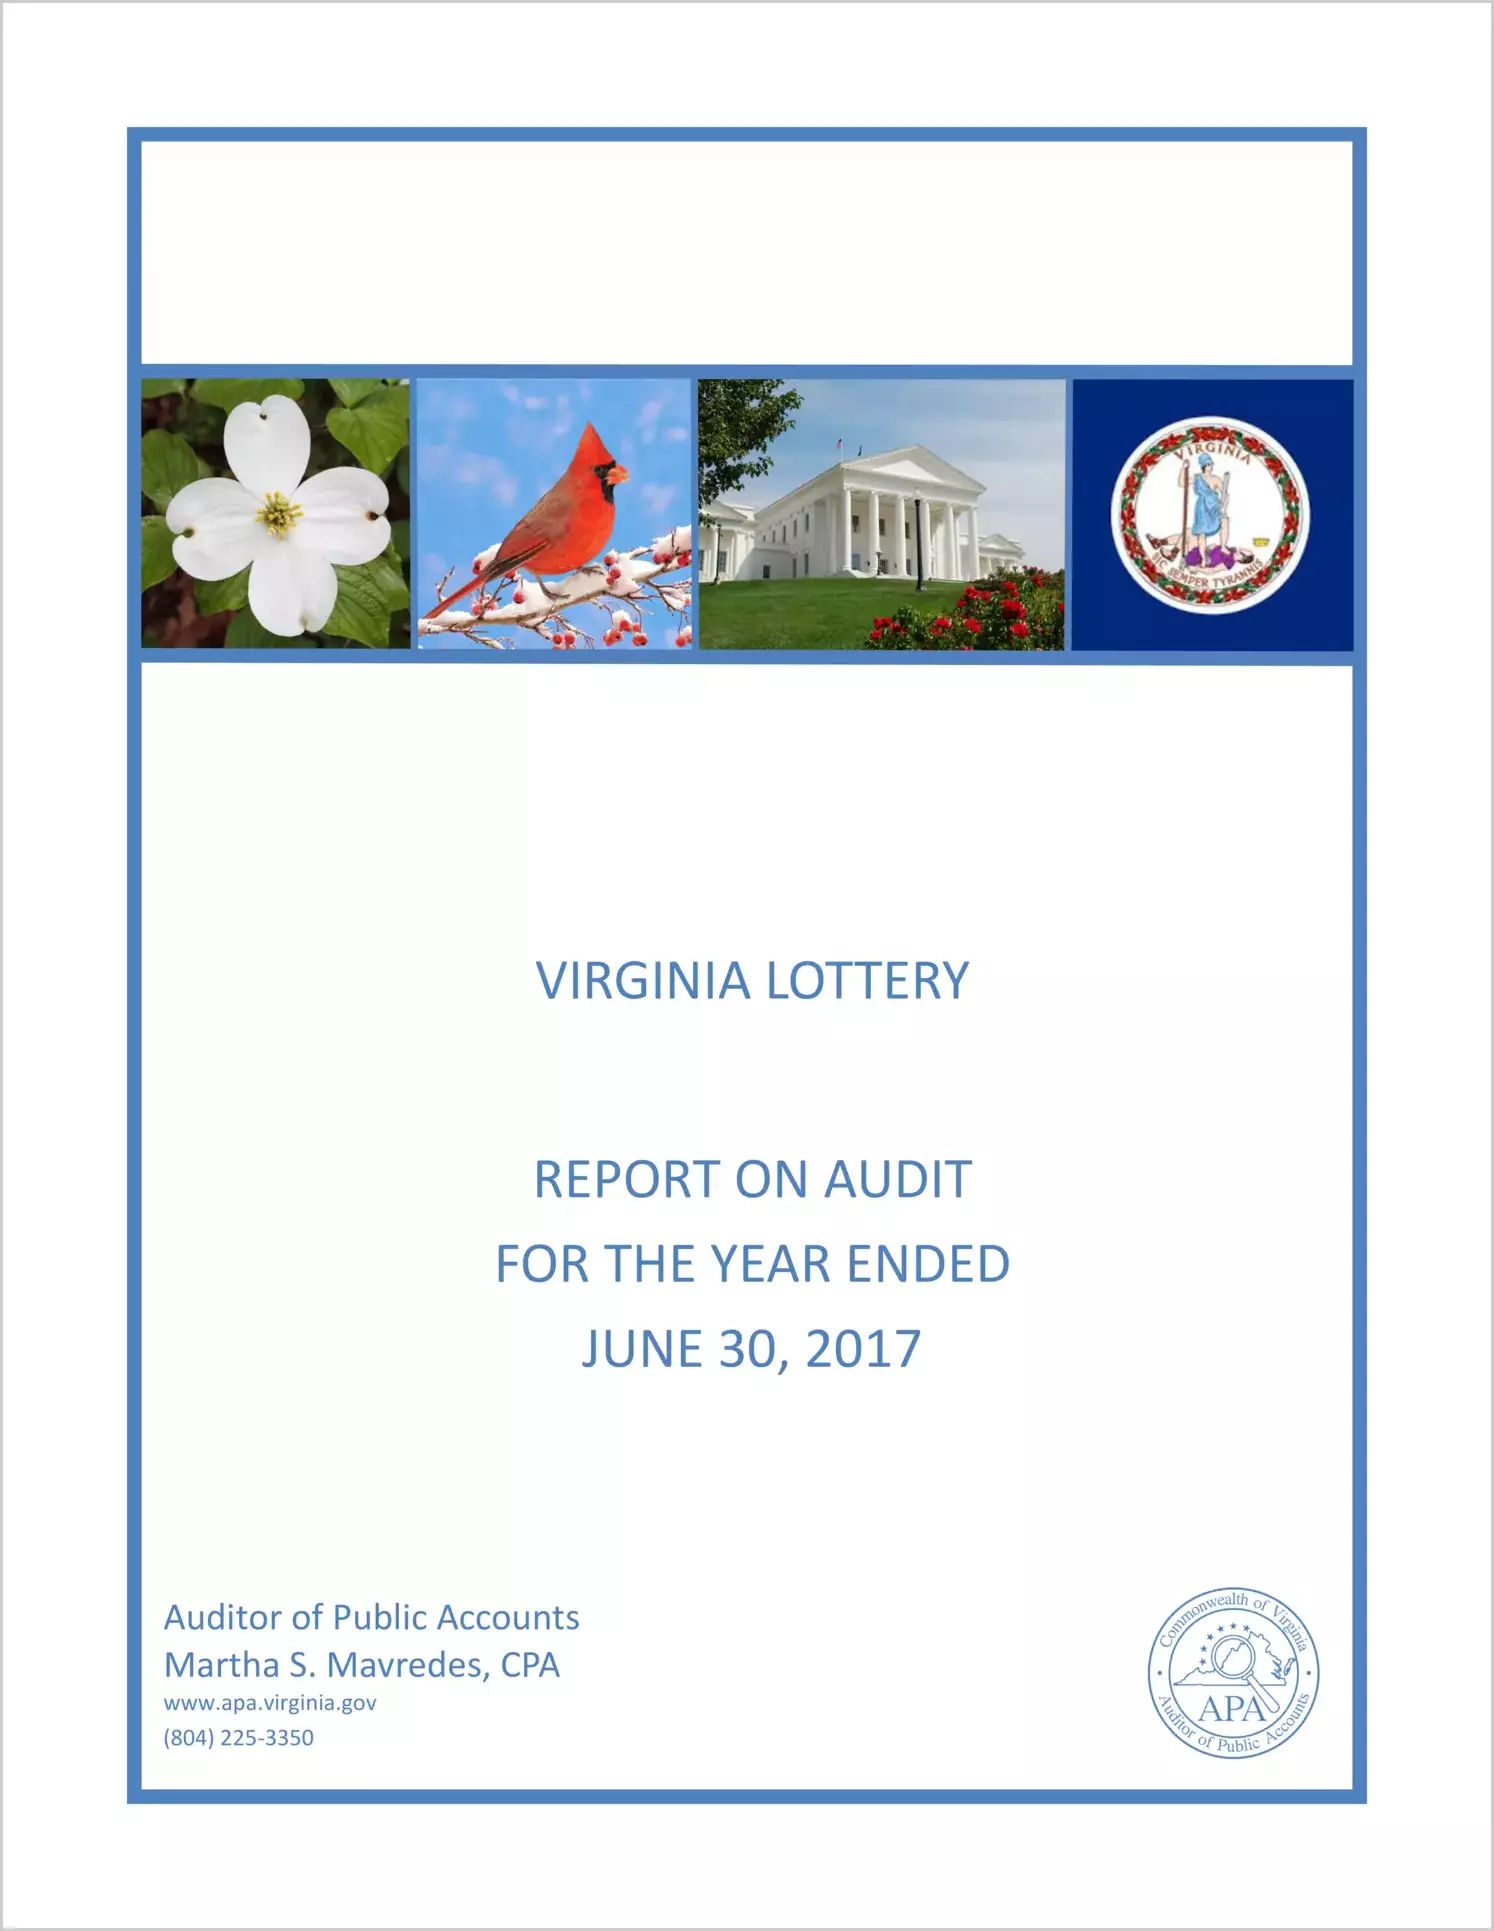 Virginia Lottery for the year ended June 30, 2017